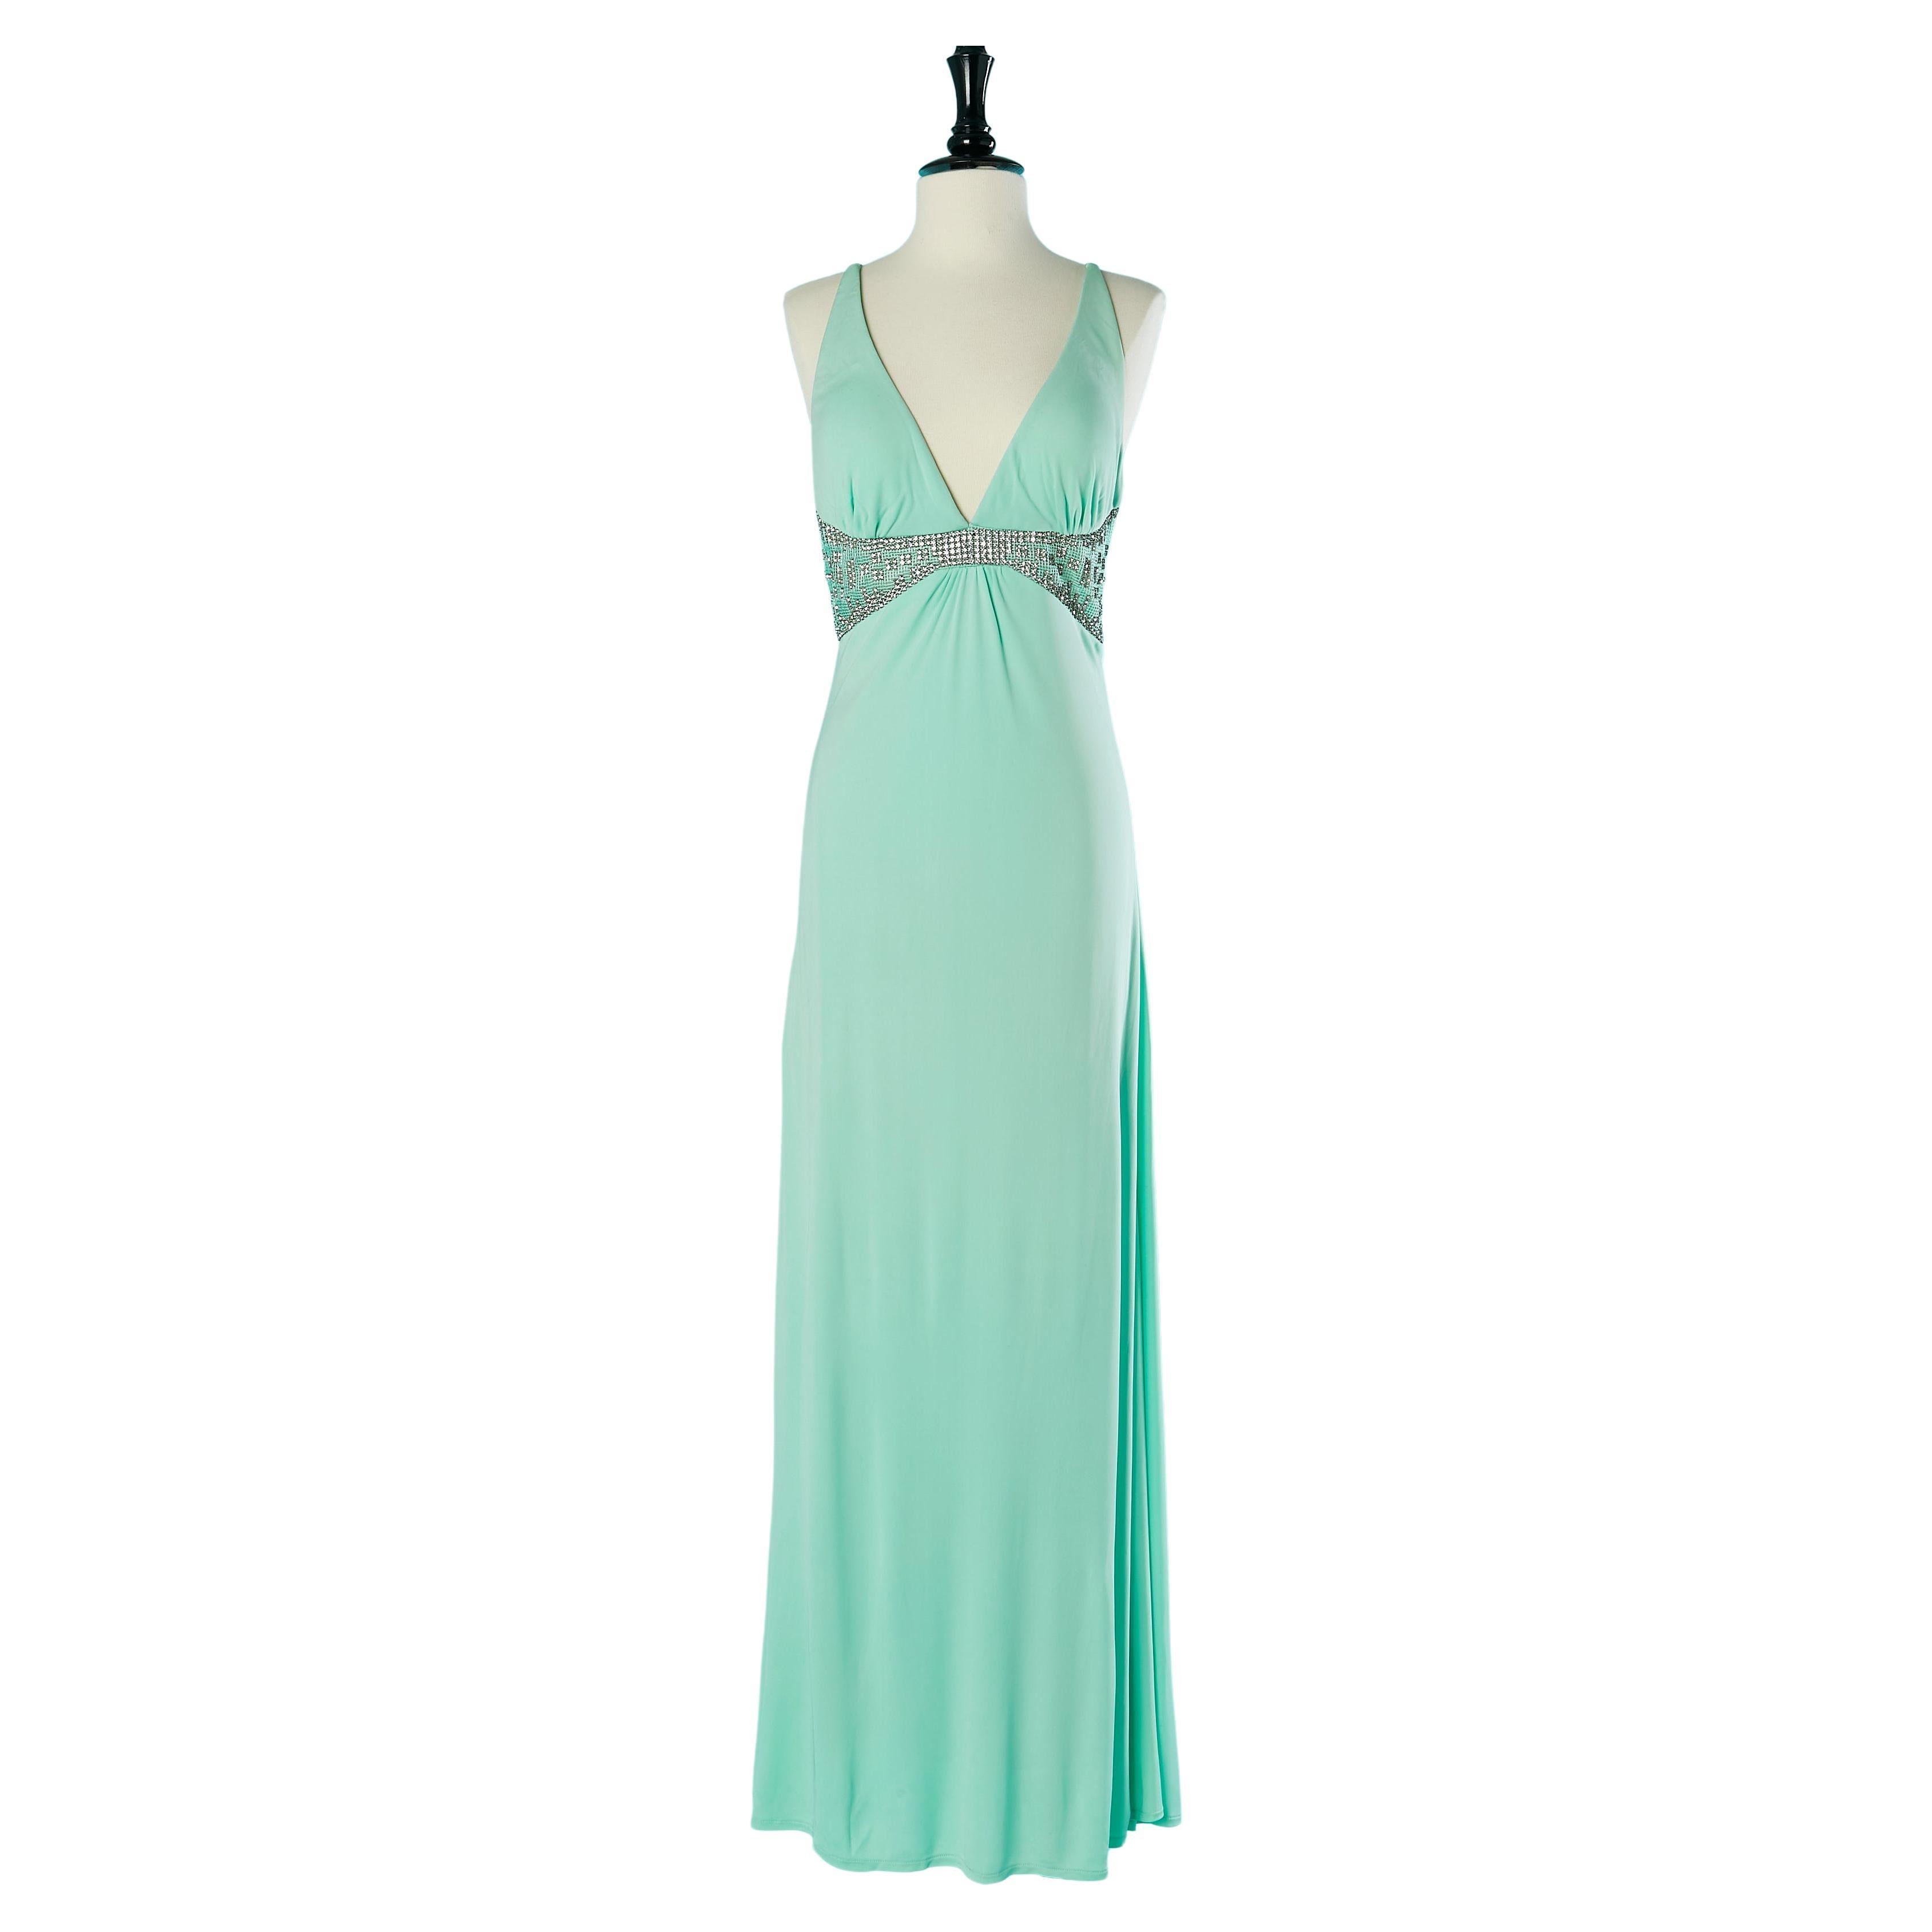 Pale green evening dress with rhinestone waist Gai Mattiolo New with tag For Sale